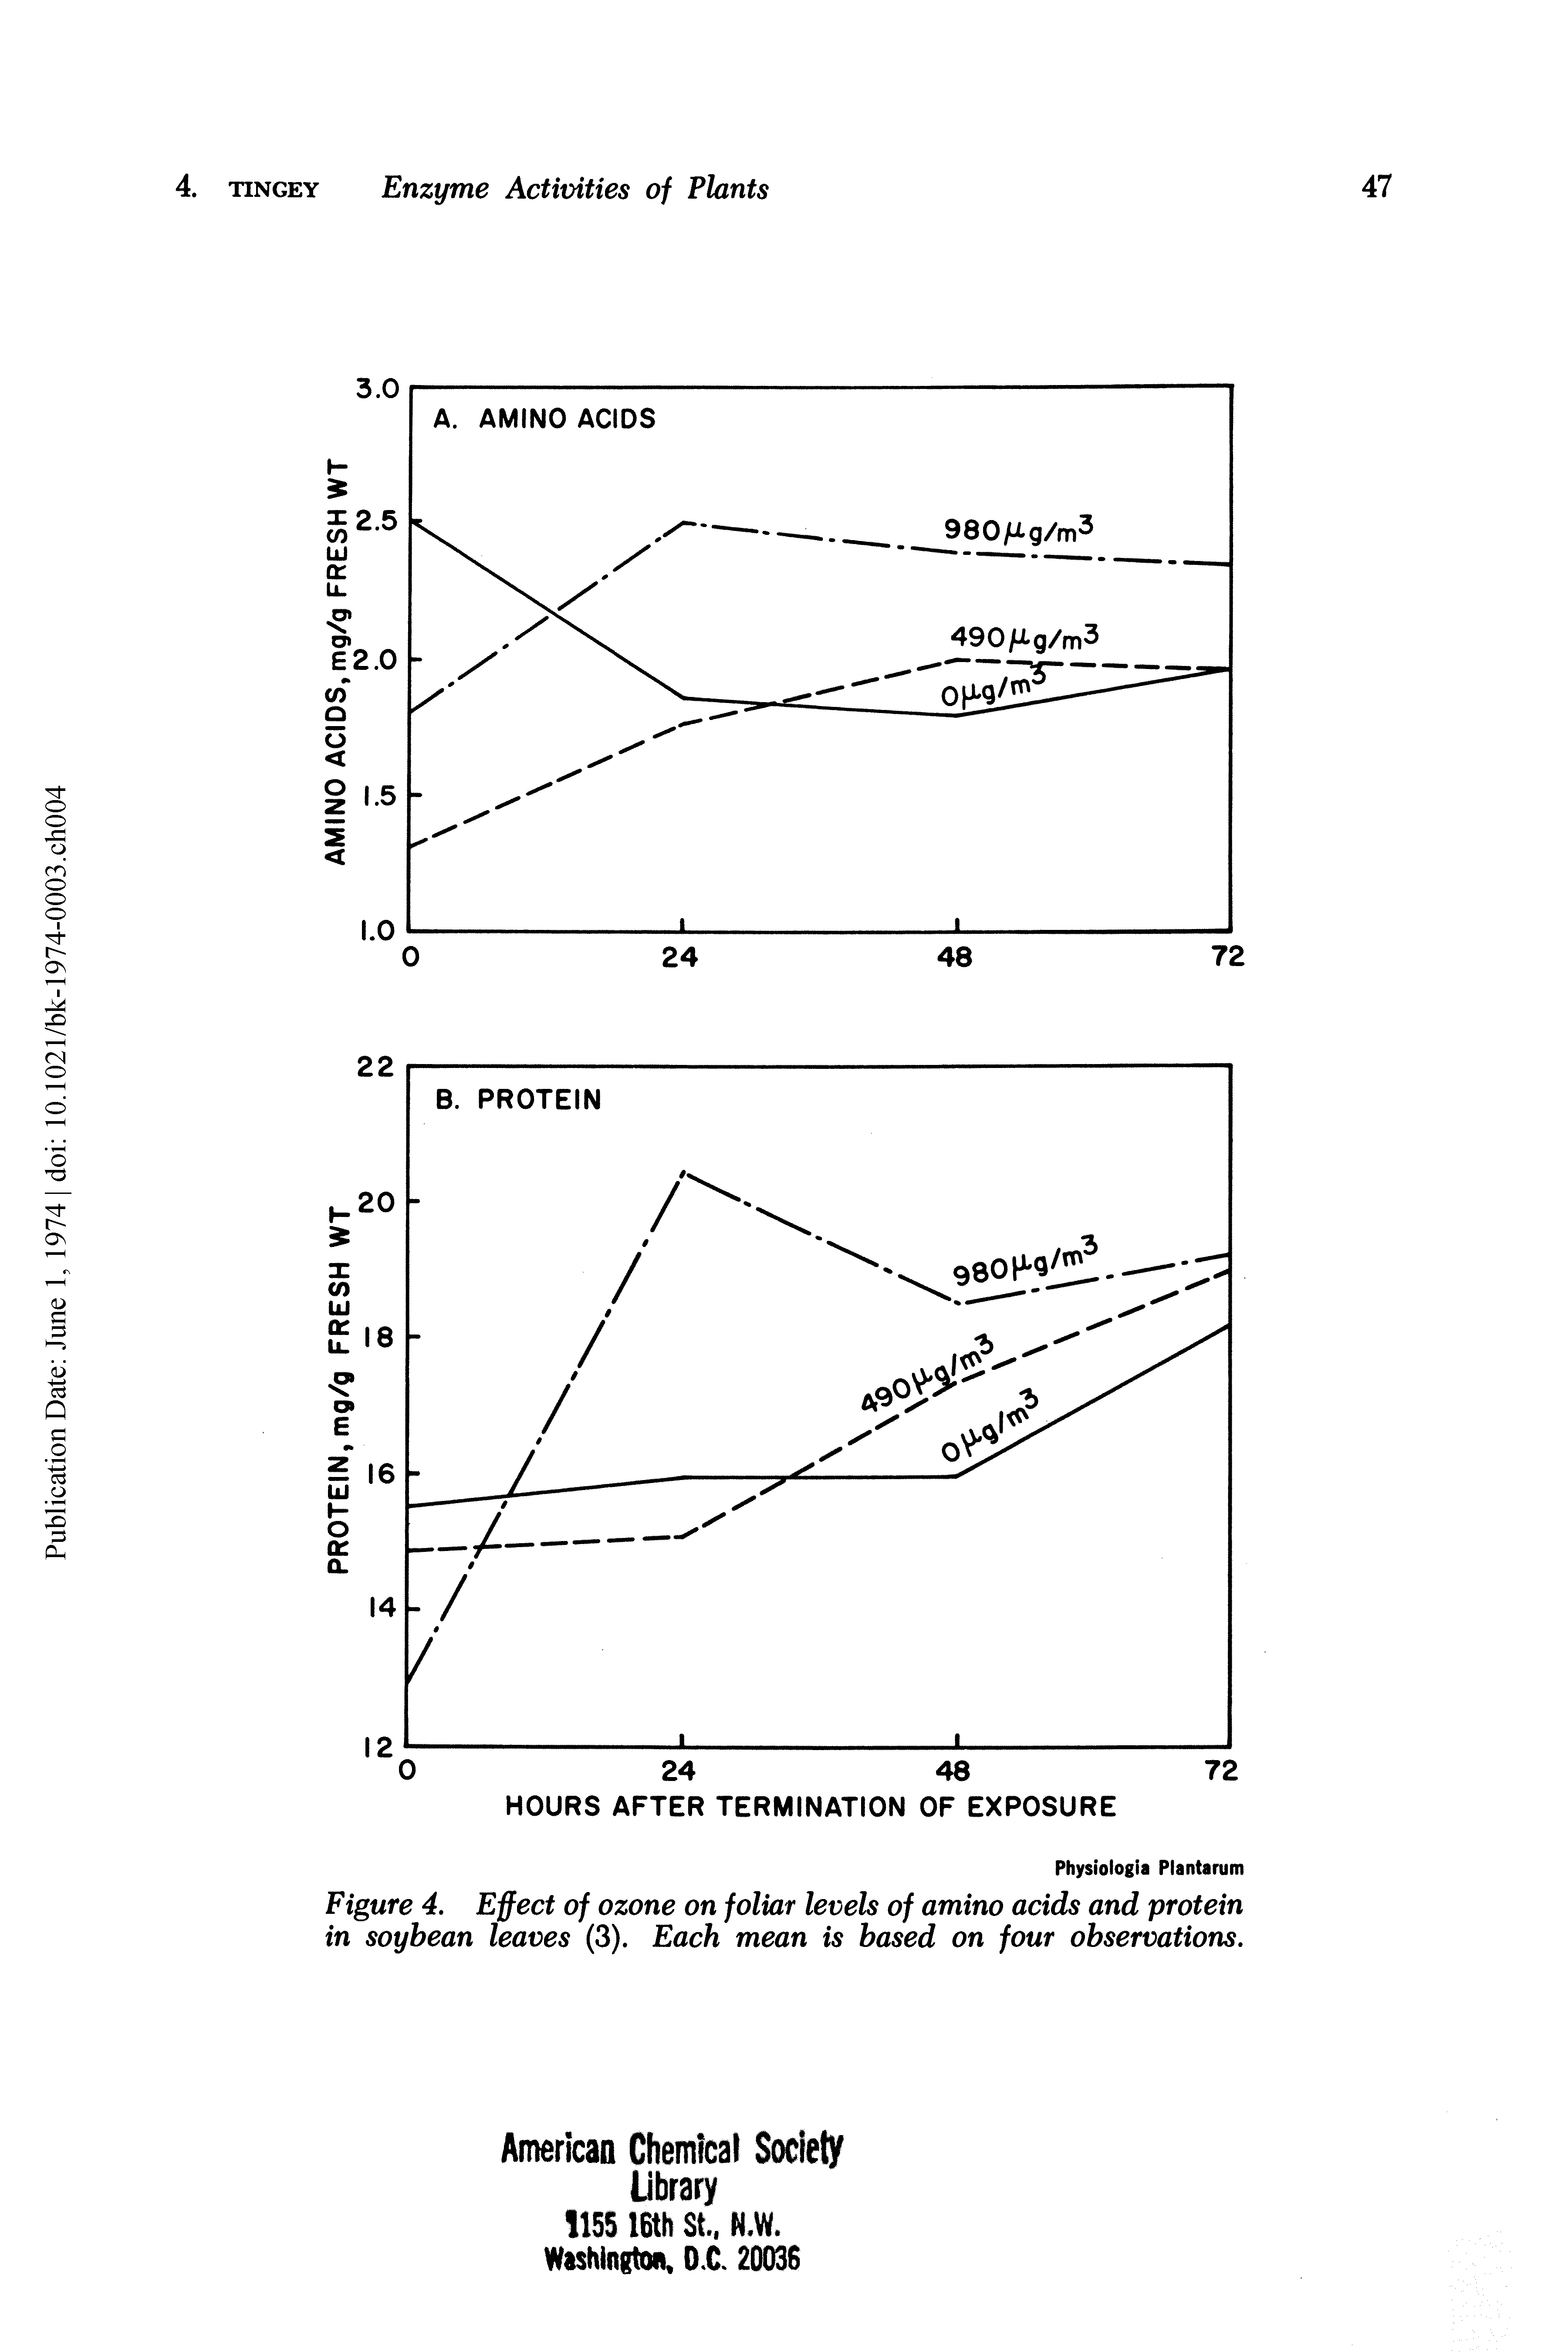 Figure 4. Effect of ozone on foliar levels of amino acids and protein in soybean leaves (3). Each mean is based on four observations.